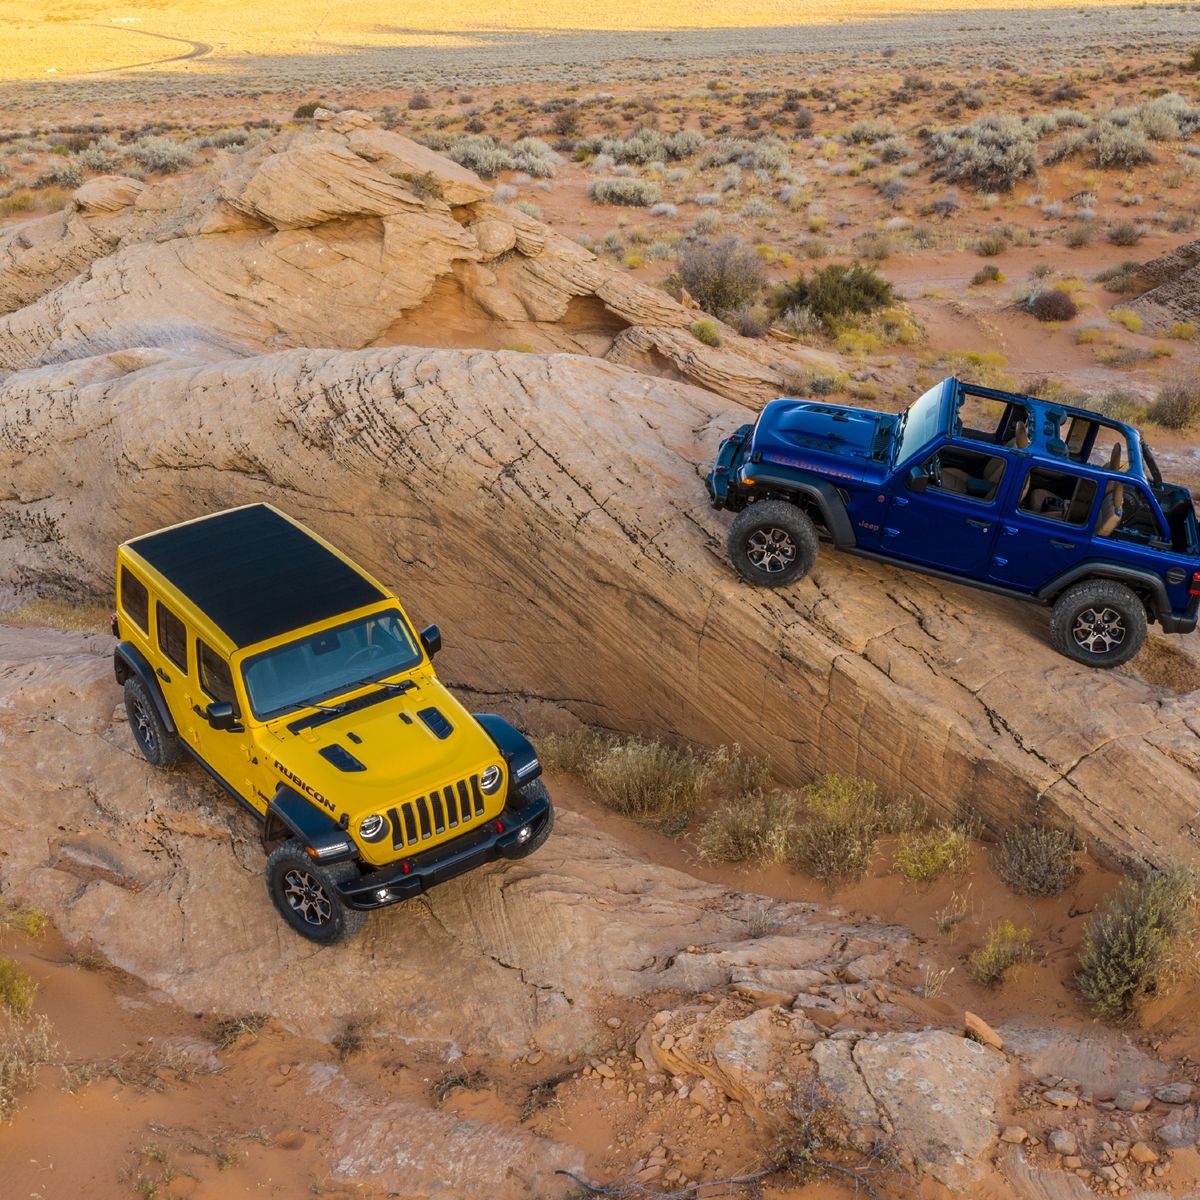 The 2020 Jeep Wrangler Ecodiesel squeezes out up to 29 mpg